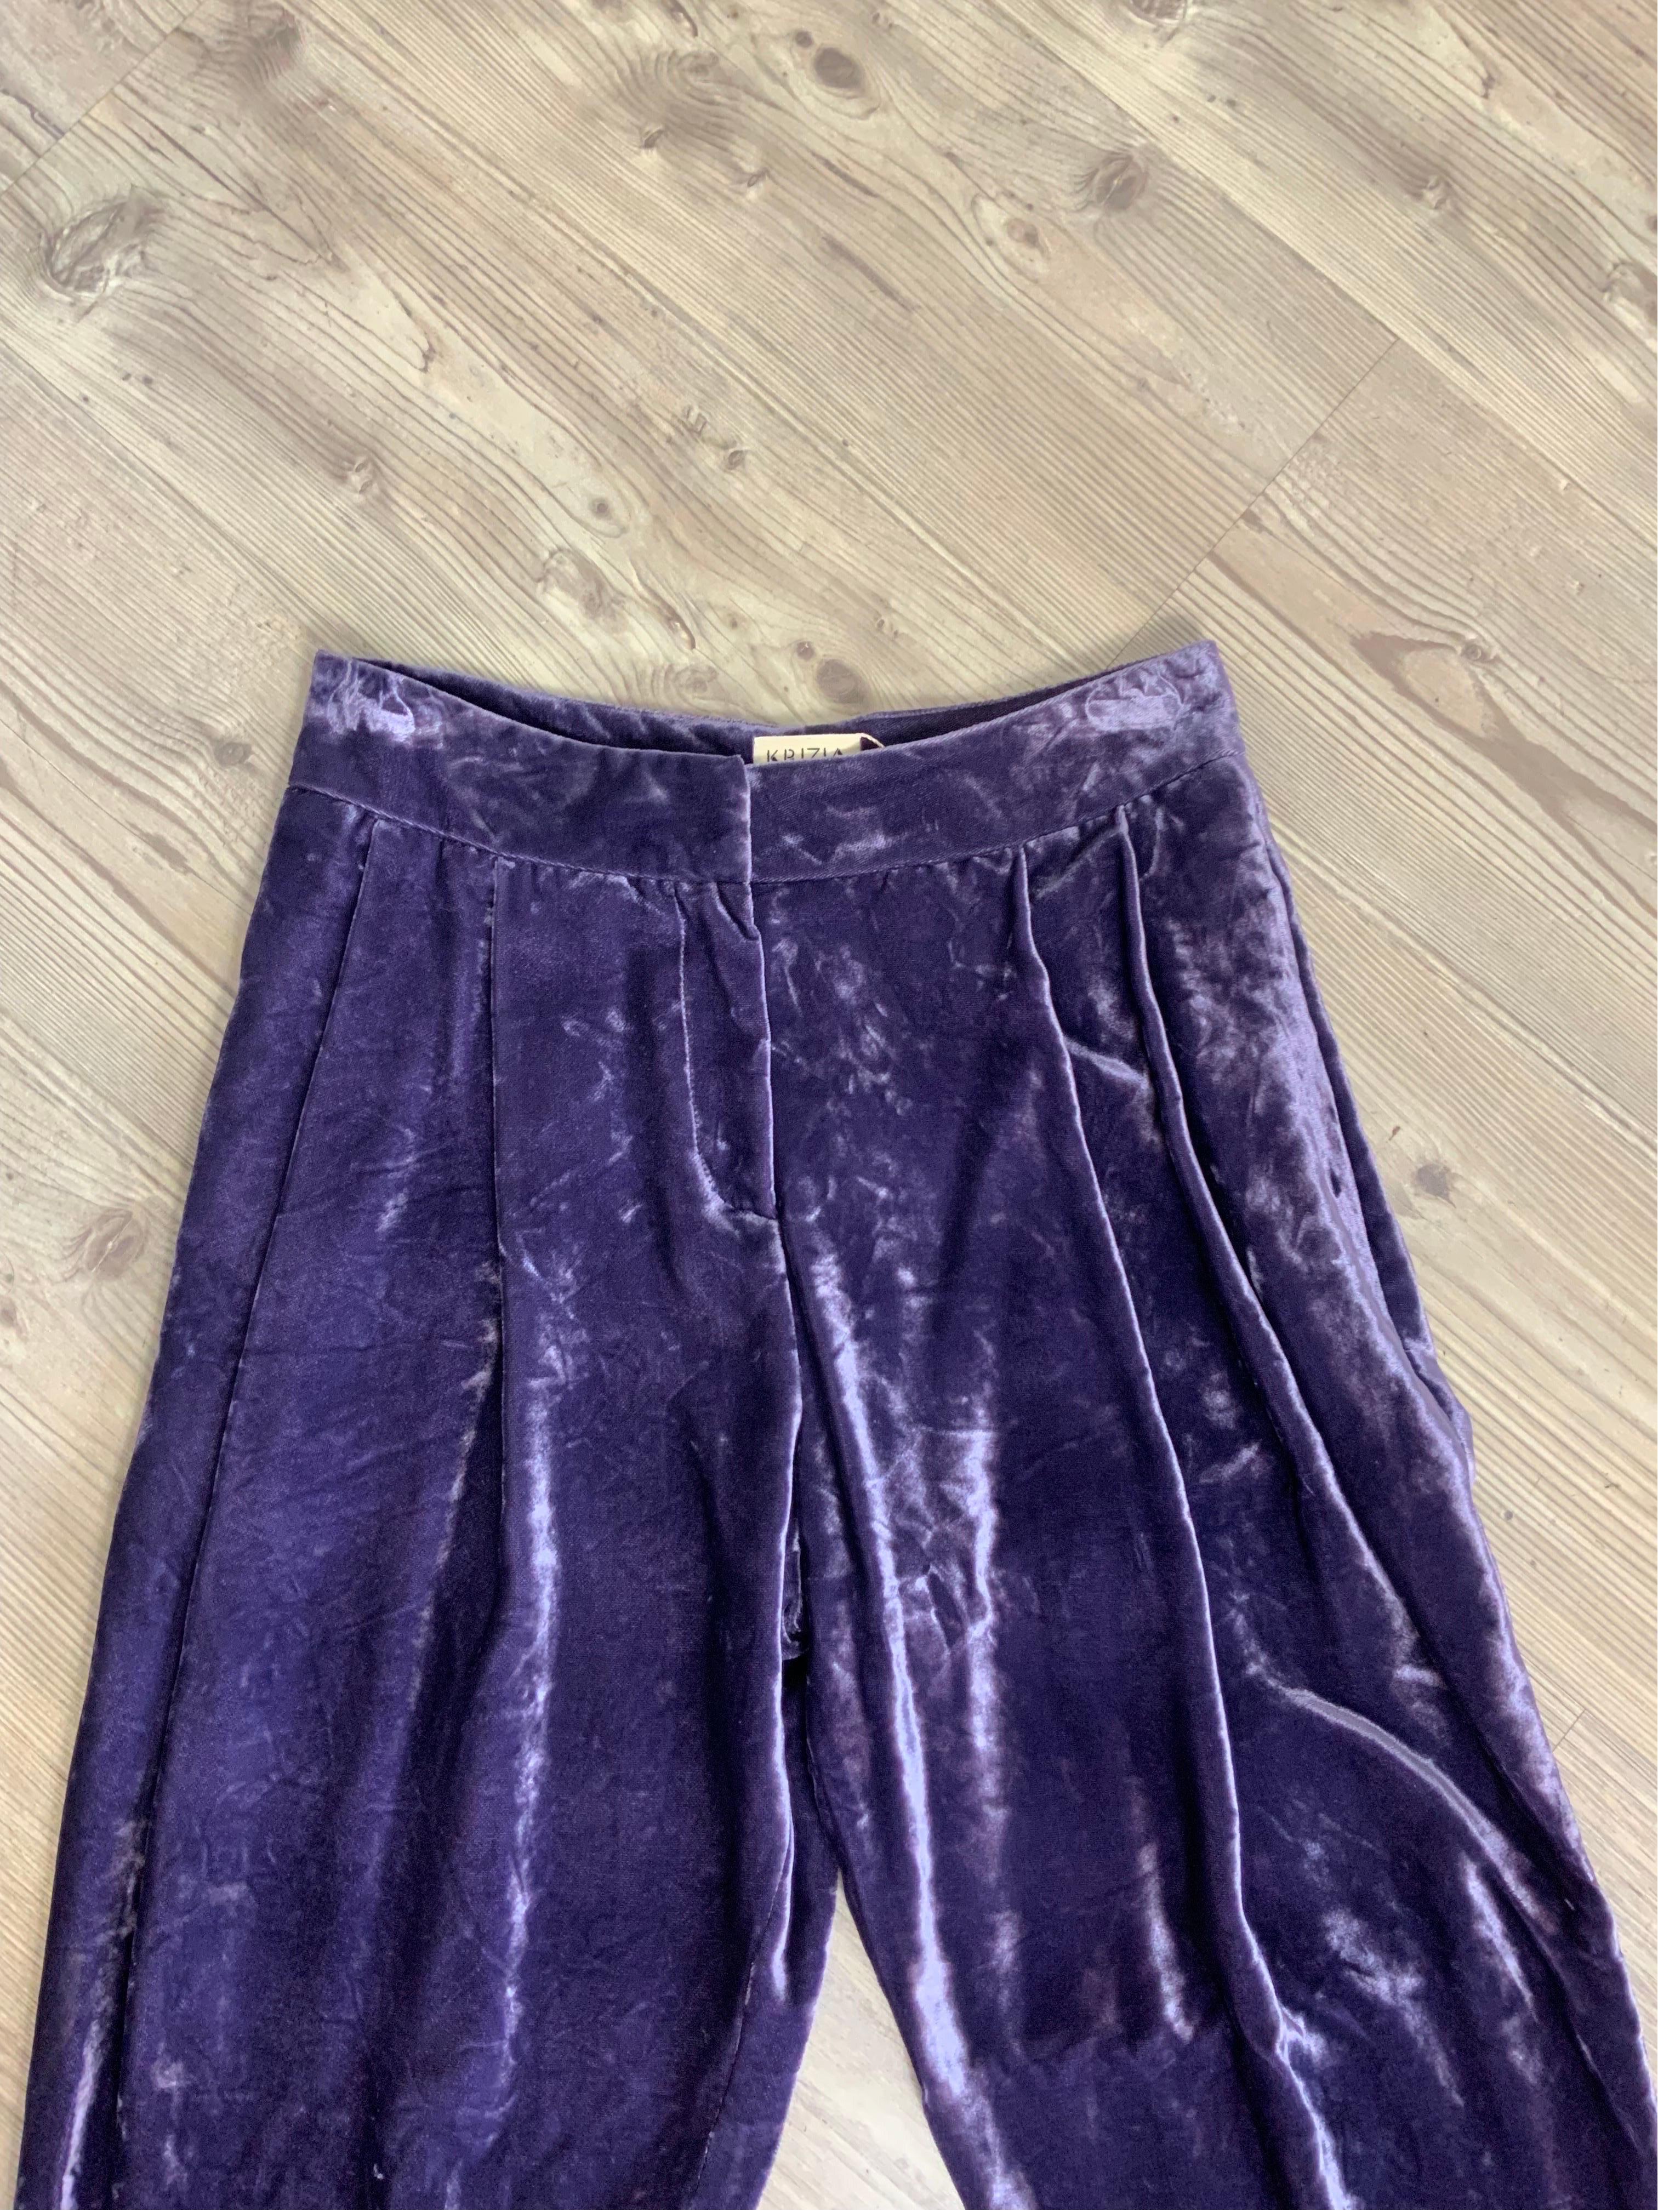 VIOLET KRIZIA TROUSERS
In purple cupro. Velvet effect.
Italian size 42.
Waist 38 cm
Hips 50 cm
Length 106 cm
Although they are new with tags, they have minimal hanger marks on the fabric as seen in pics